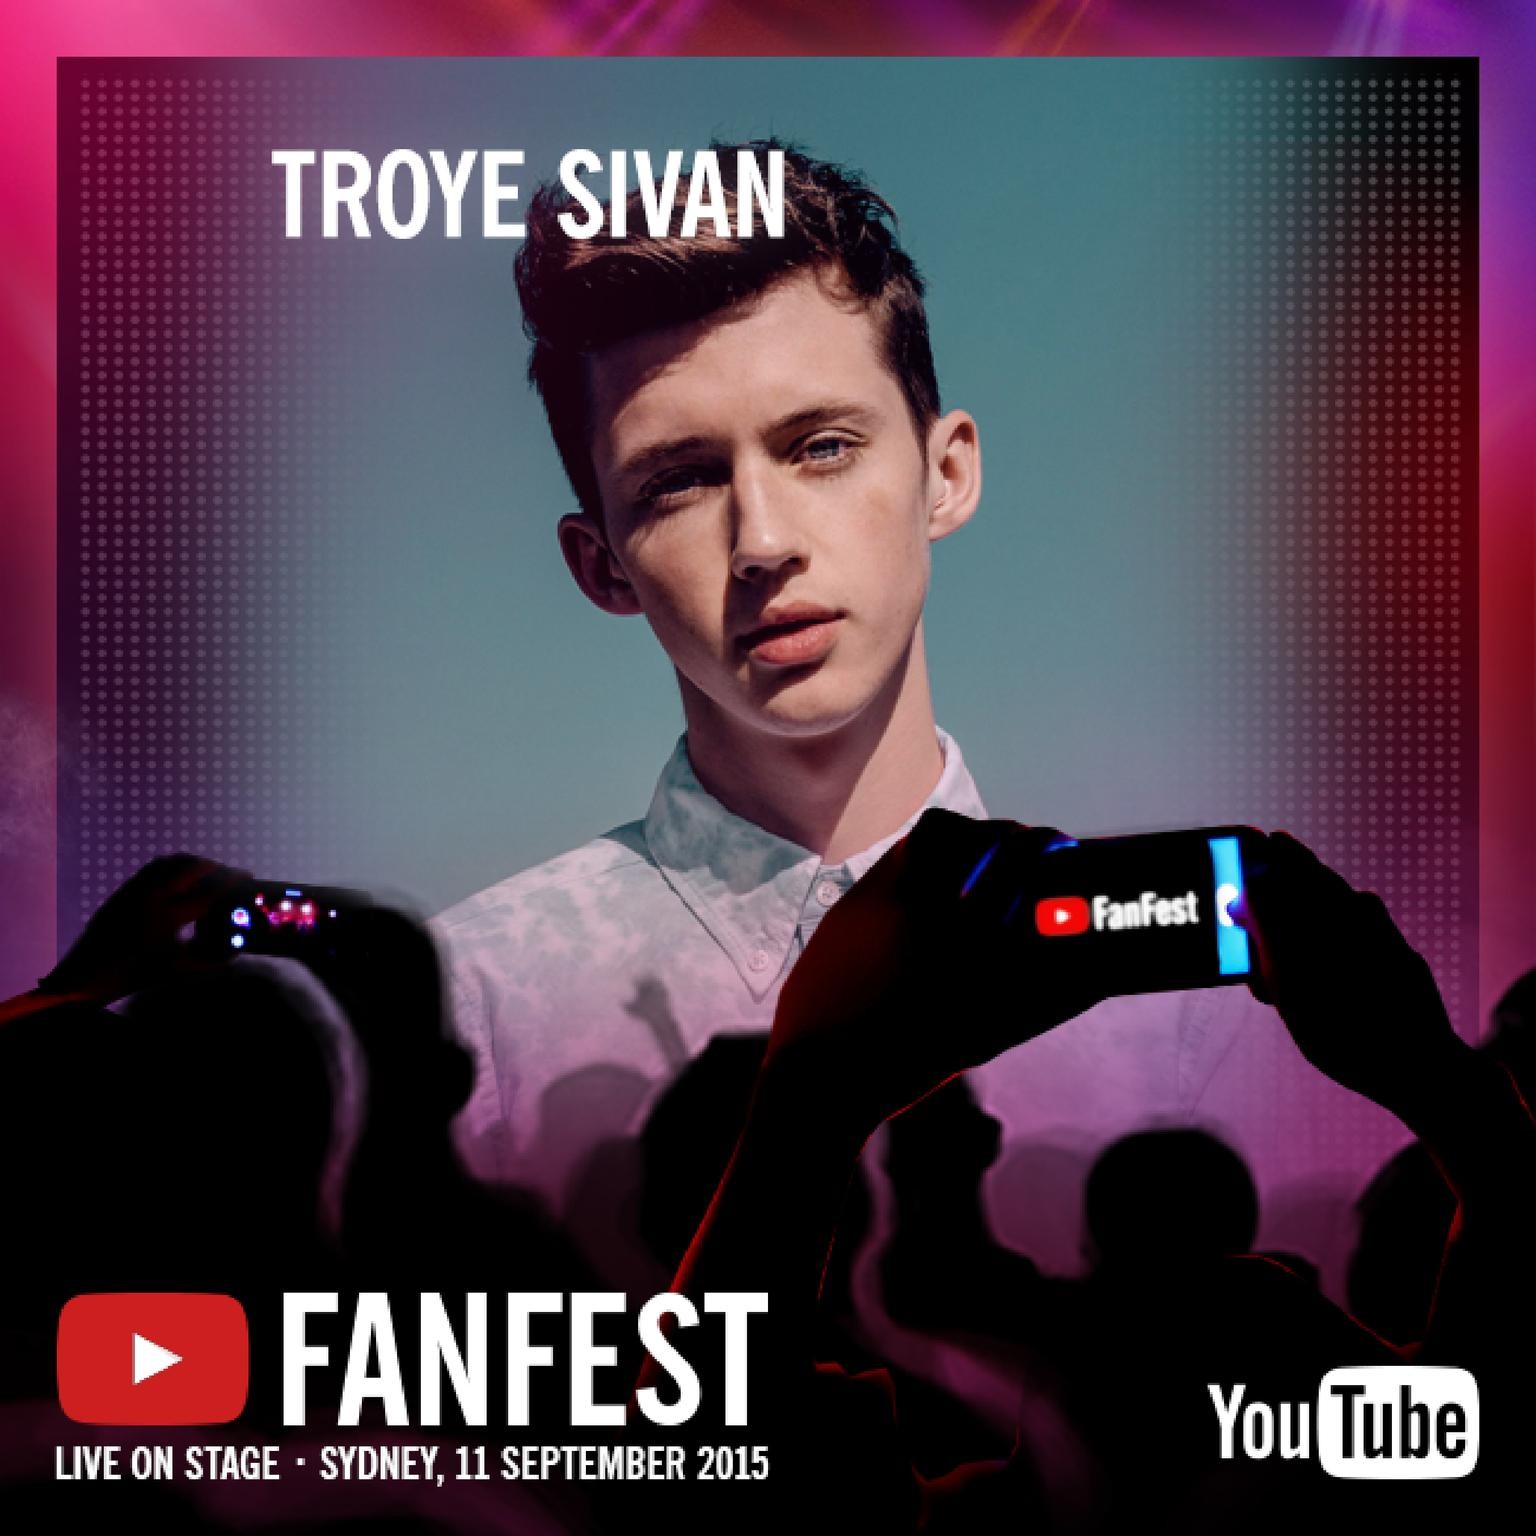 I LOVE YOU TROYE!!!!!!!! HOW HP TAPPED INTO YOUTUBE CELEBS TO WOO YOUNG FEMALES…